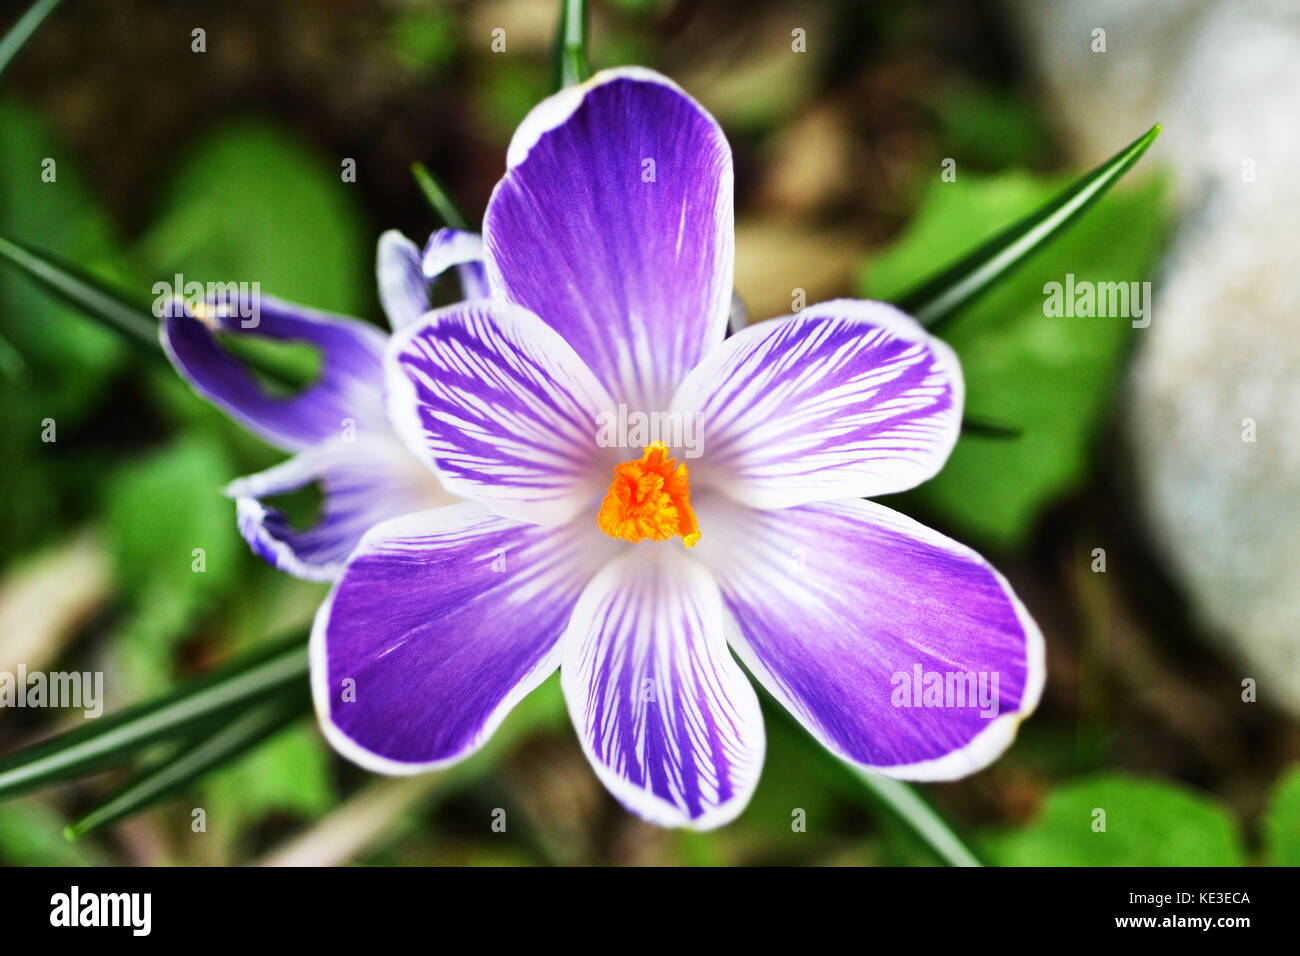 Pickwick Crocus detail. Top view Close up showing the peculiar purple and white striped petals Stock Photo